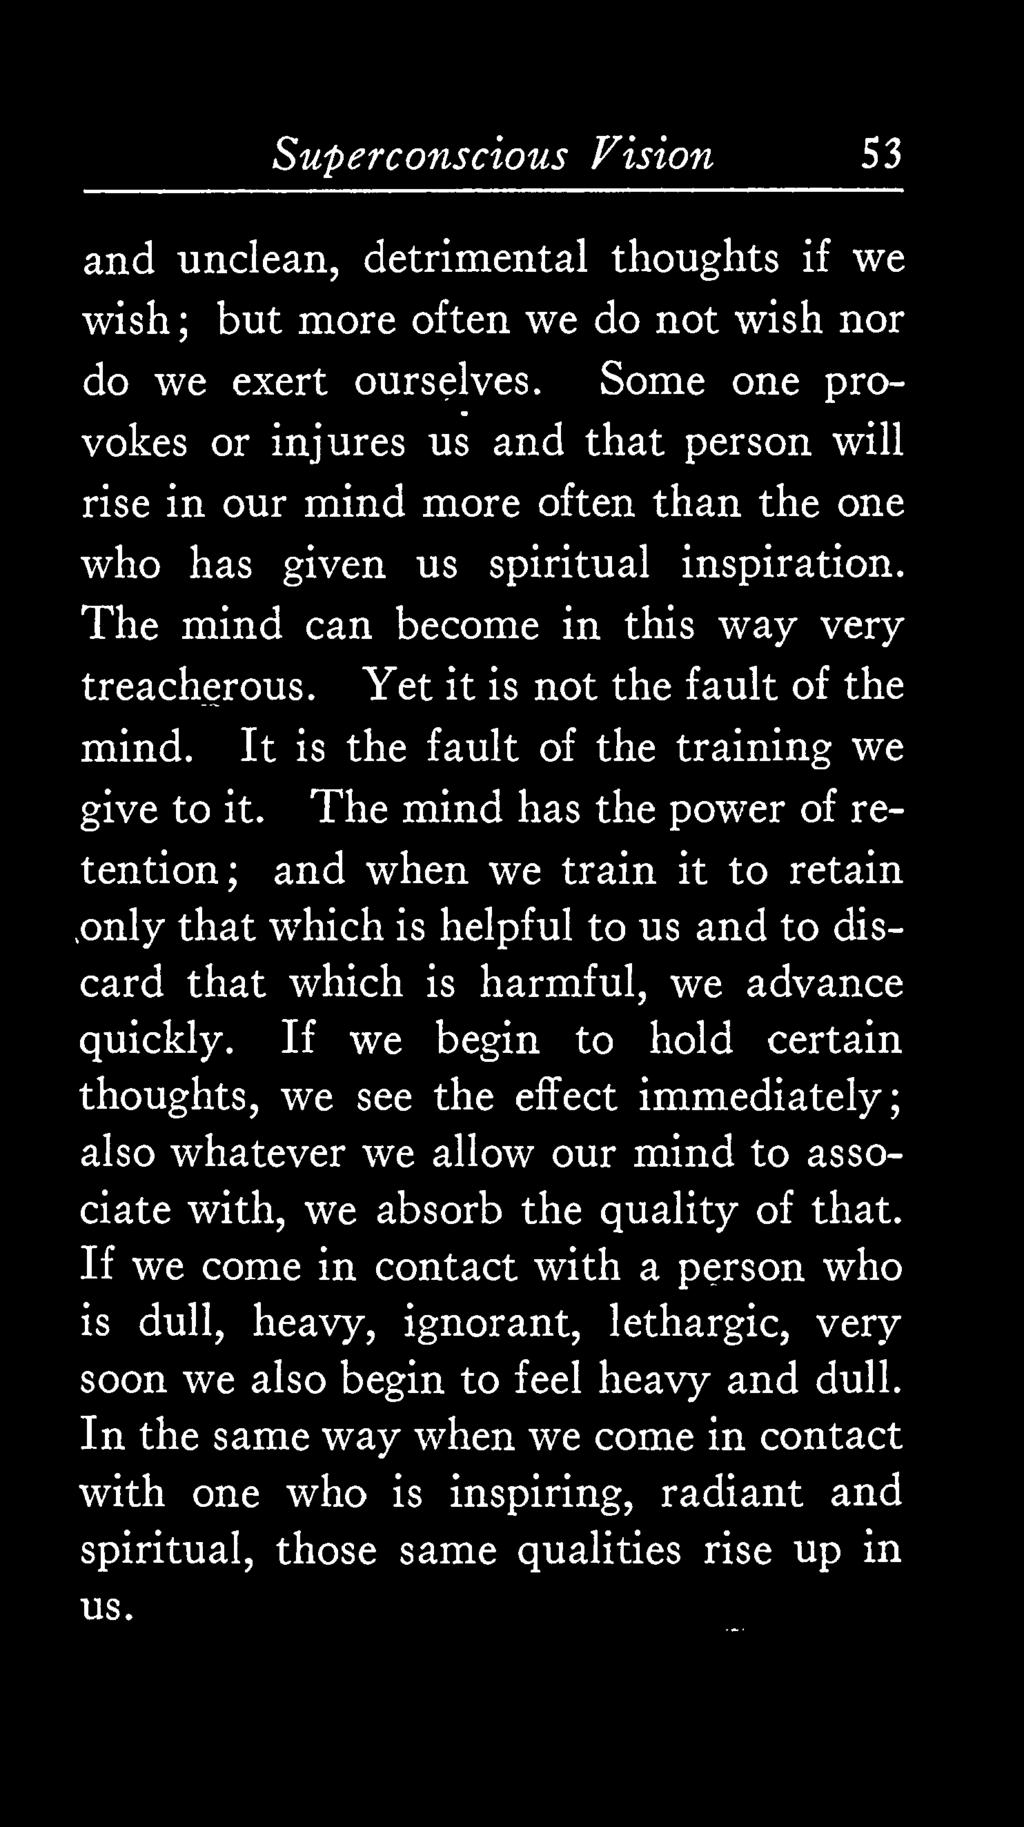 Yet it is not the fault of the mind. It is the fault of the training we give to it.